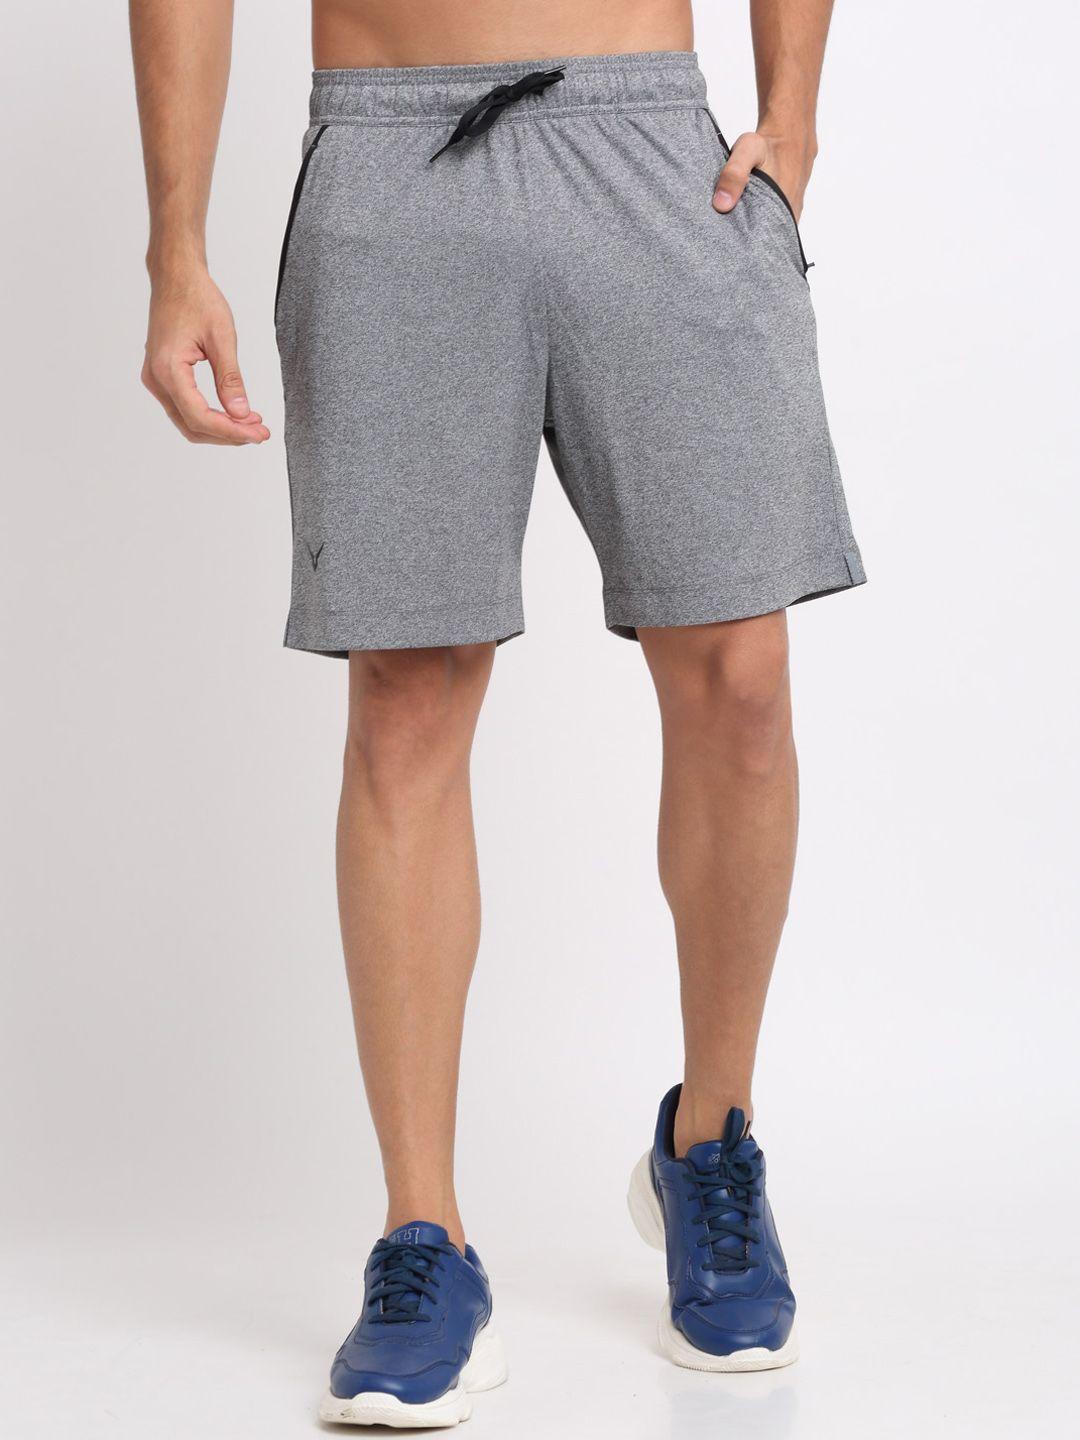 invincible men mid-rise rapid-dry technology sports shorts